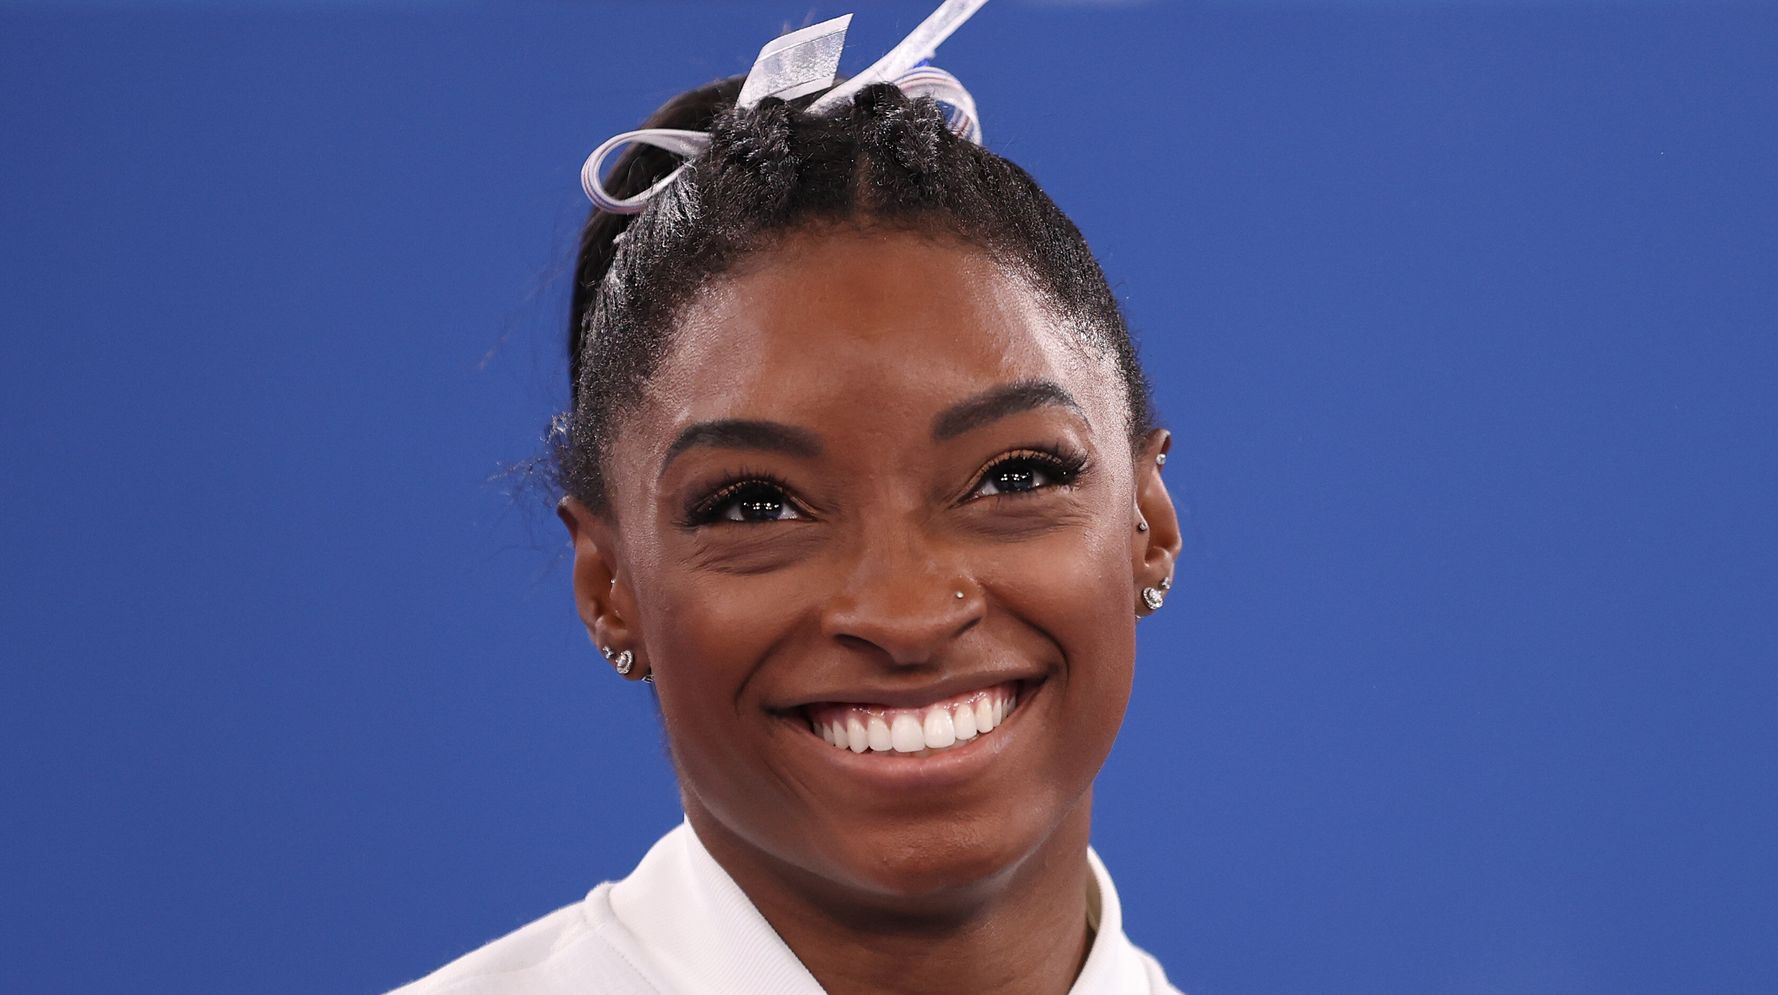 Simone Biles Reveals What She 'Never Truly Believed' About Herself Until Now